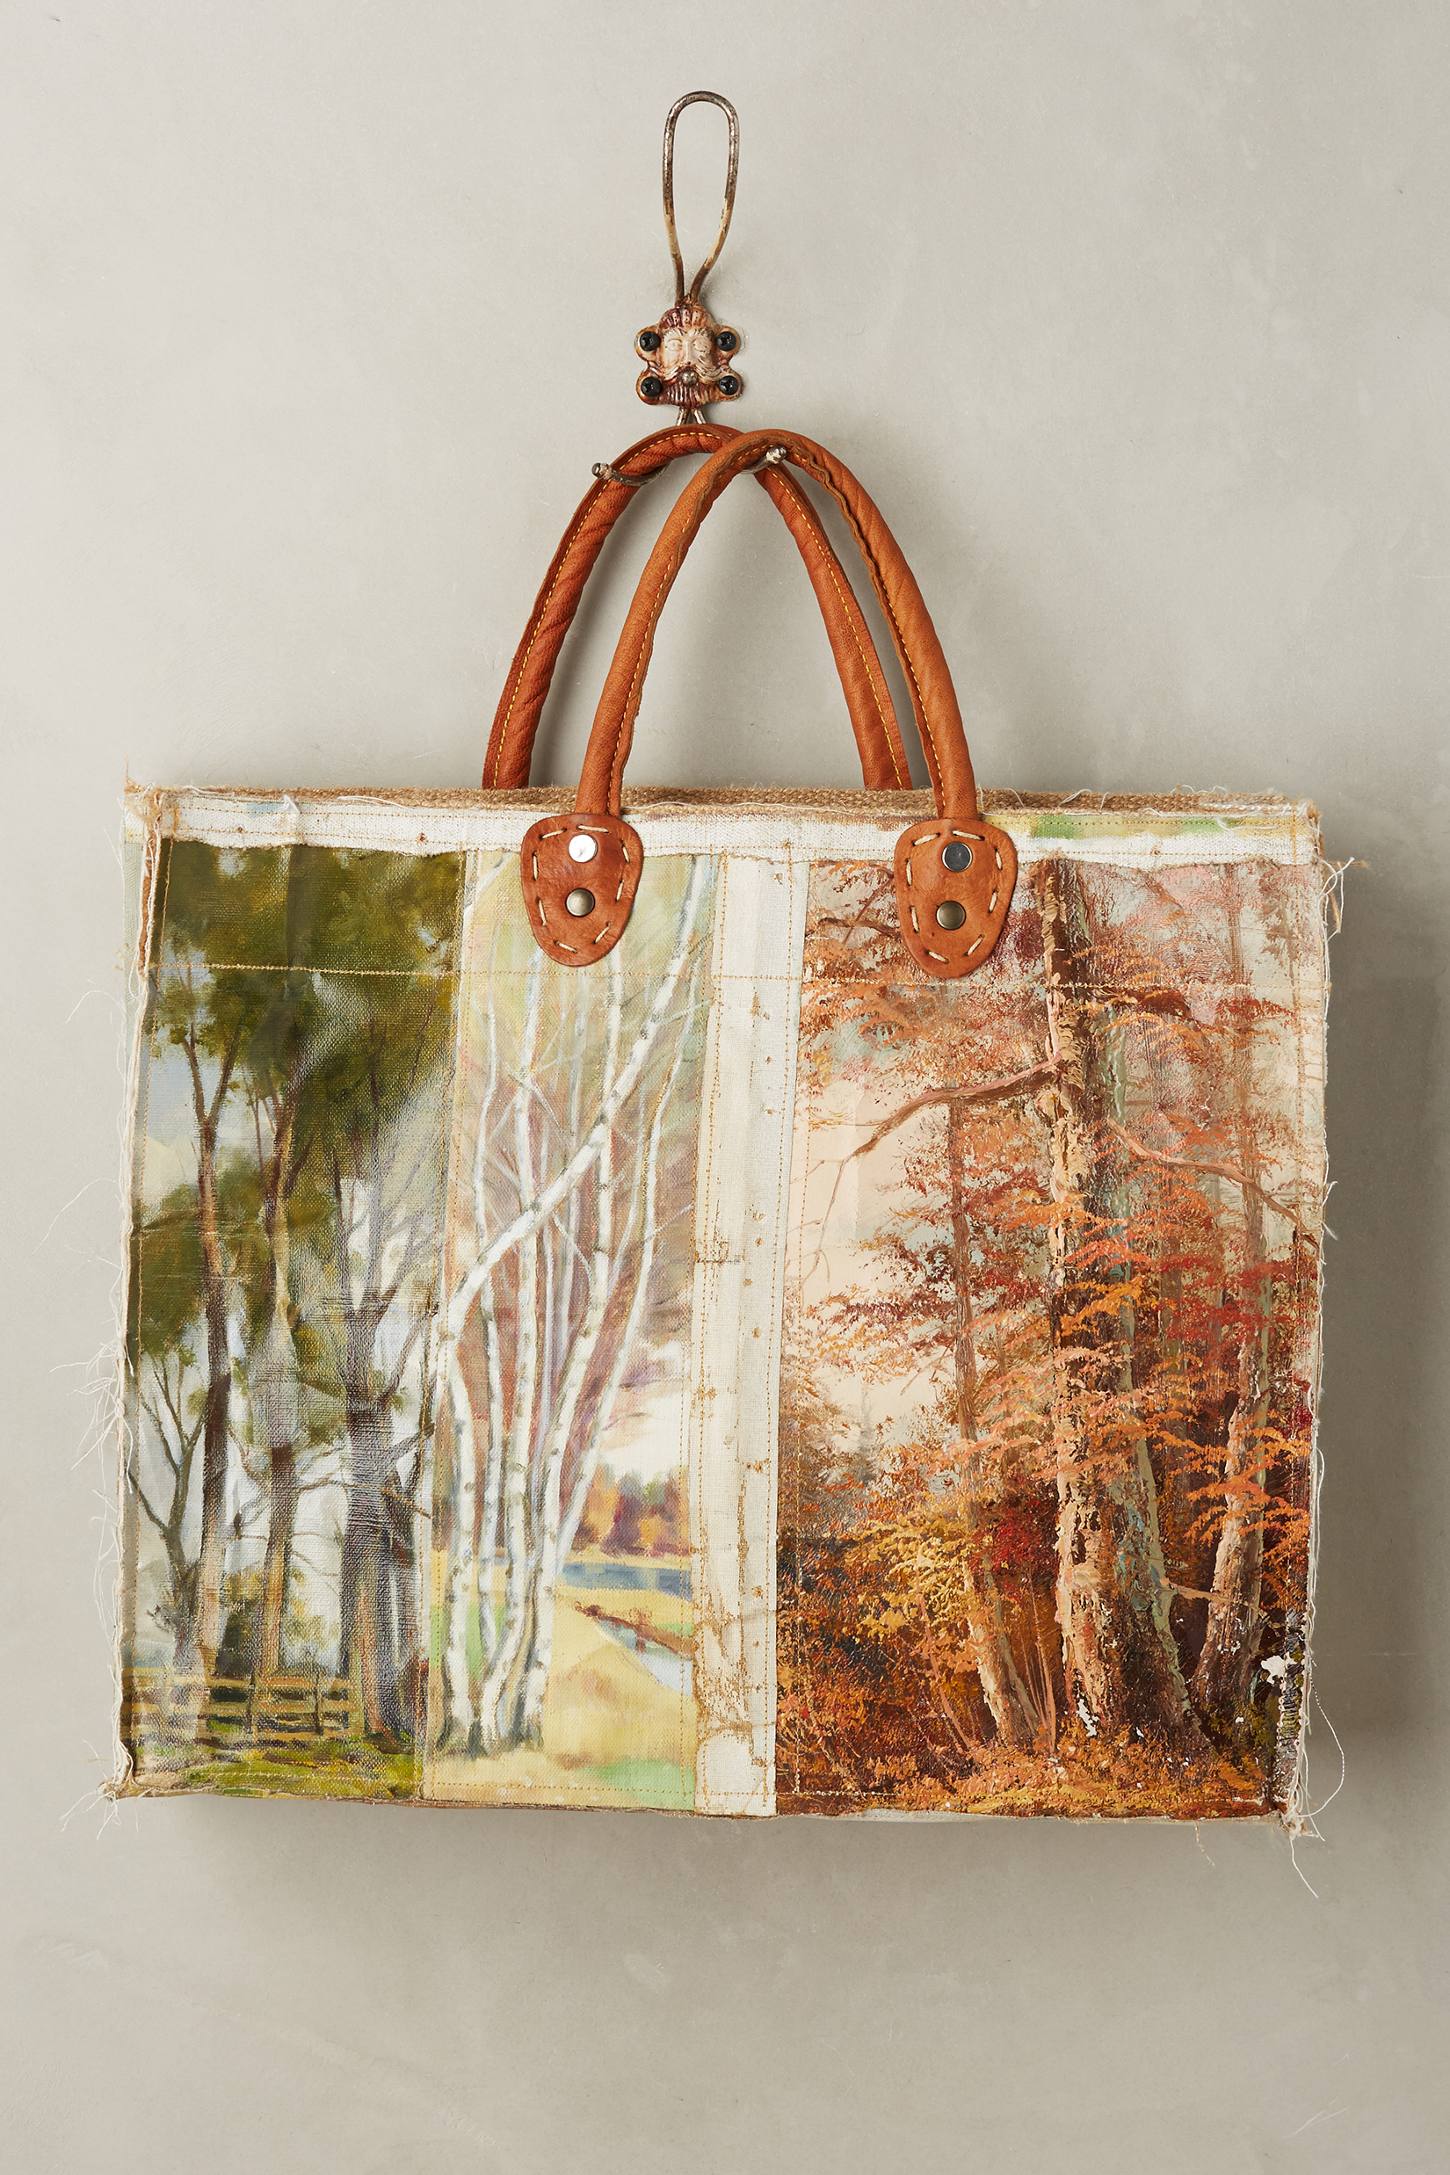 One-of-a-Kind Lakeview Tote by Leslie Oschmann